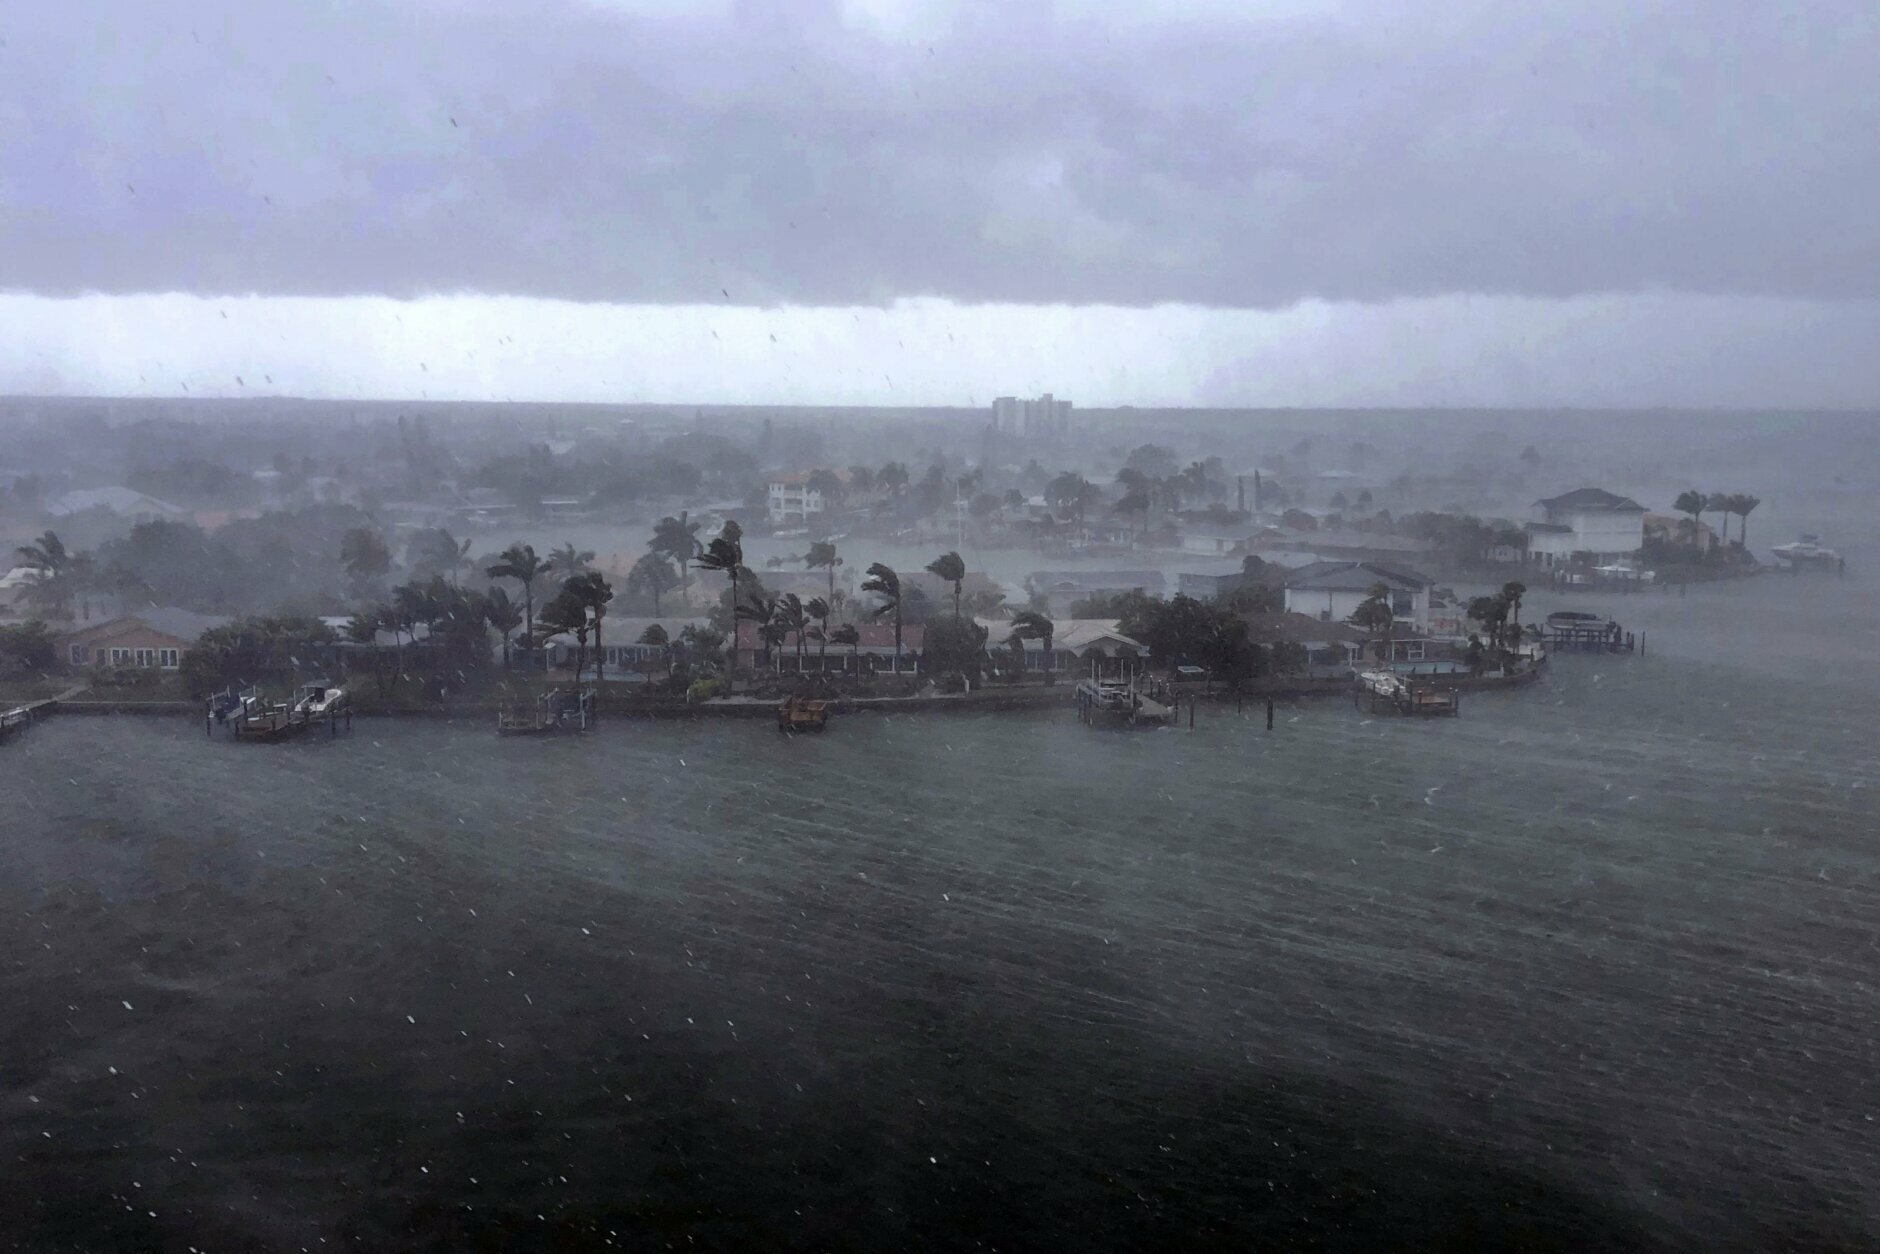 Looking north at the neighborhood of Paradise Island on Treasure Island, Fla., outer bands of Tropical Storm Elsa brings a downpour of rain over the area on Tuesday afternoon, July 6, 2021. Elsa is expected to impact the Tampa Bay area the heaviest during the predawn hours of Wednesday morning. (Marc Topkin/Tampa Bay Times via AP)